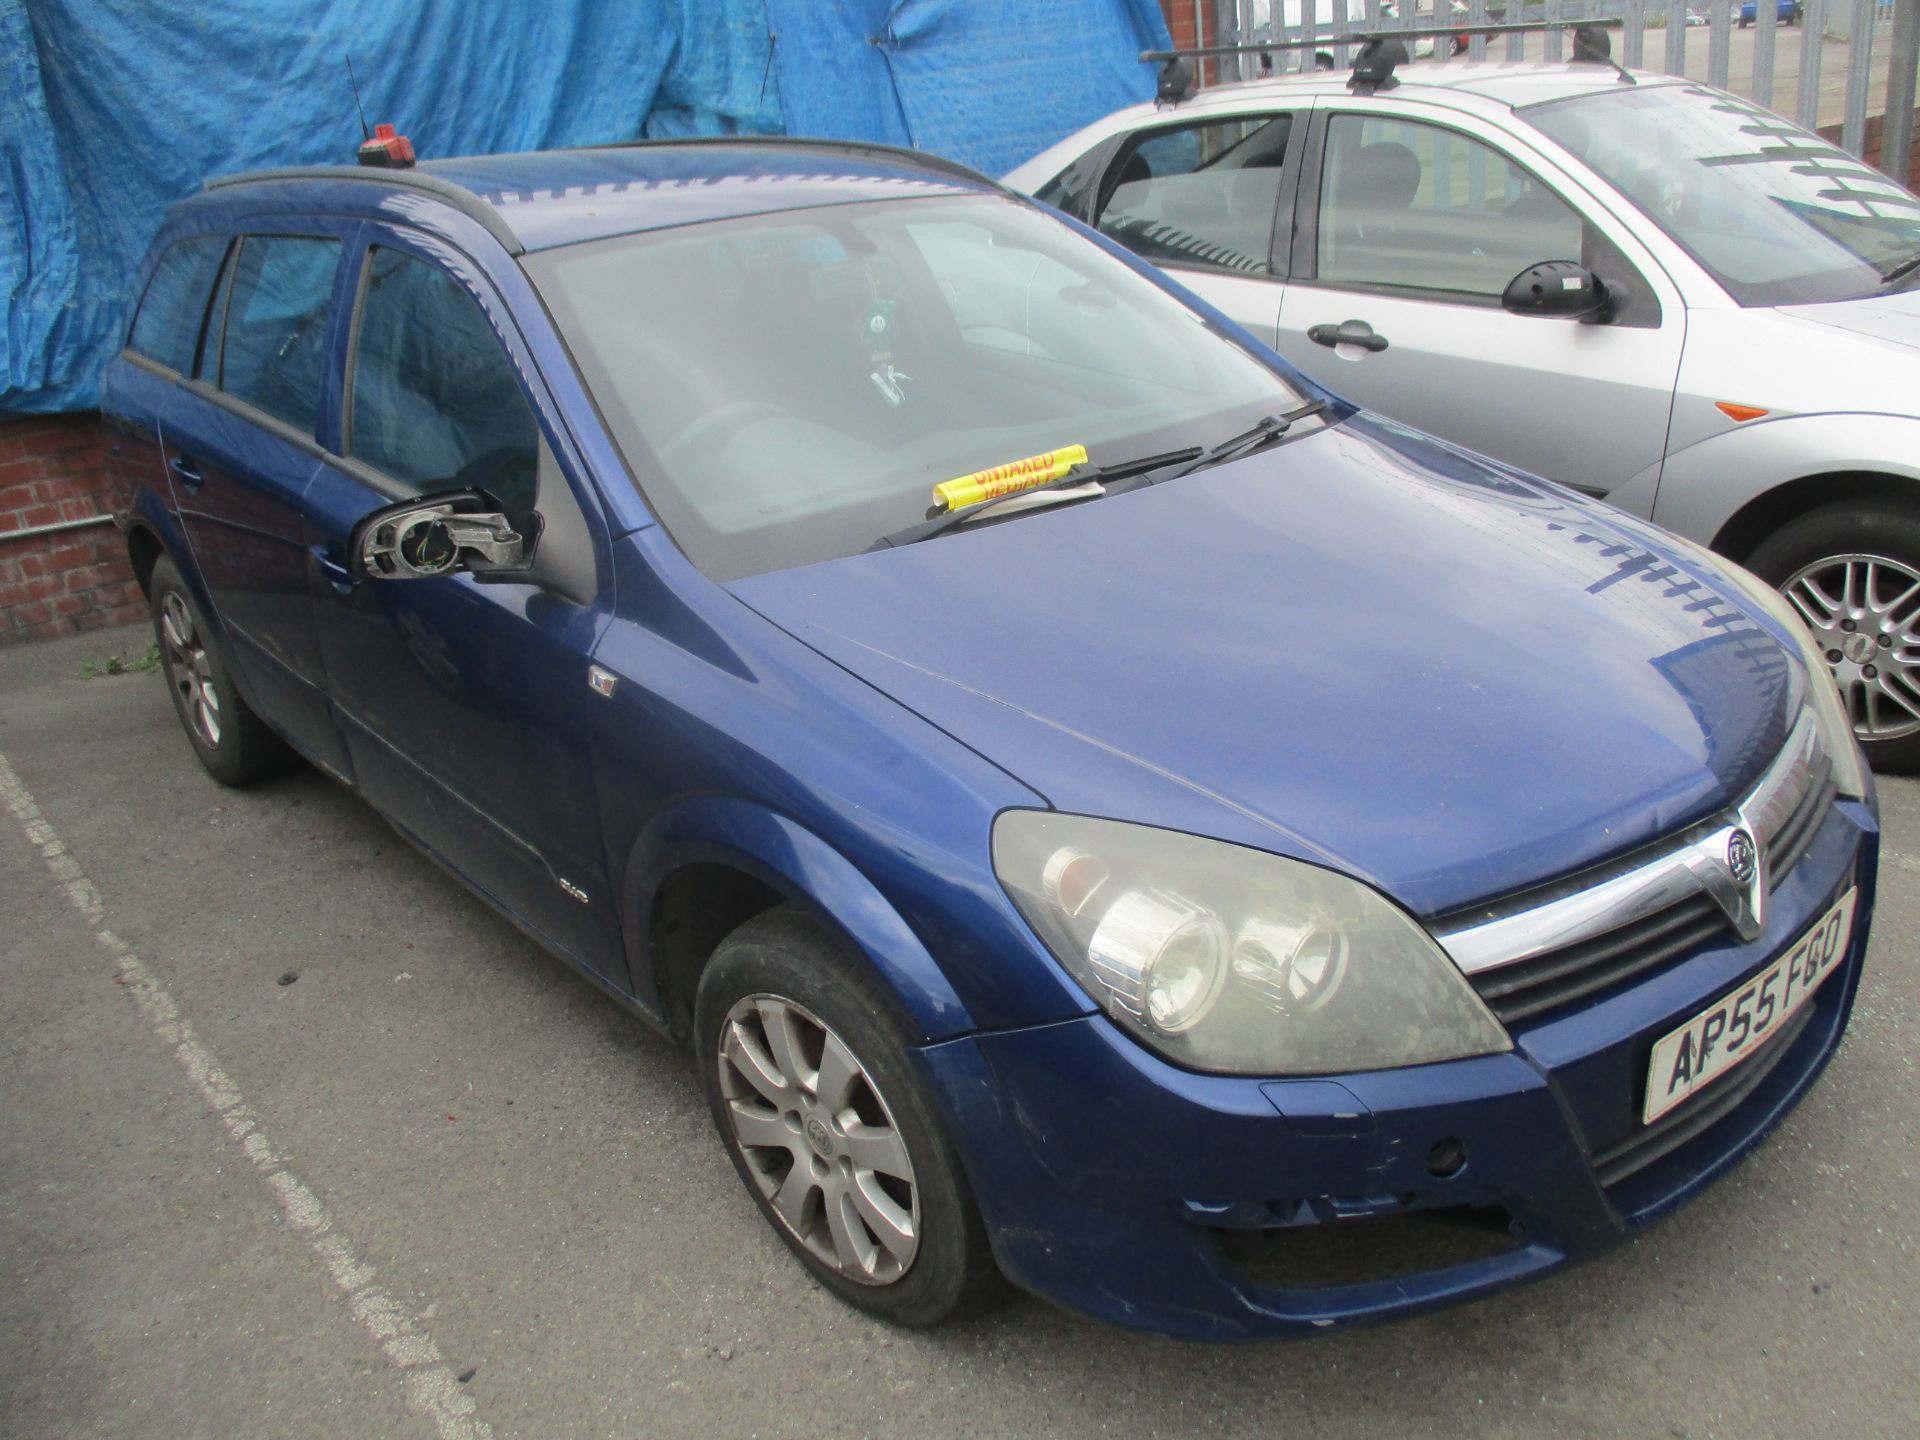 VAUXHALL ASTRA CLUB TWINPORT 1.6L ESTATE - Image 3 of 3